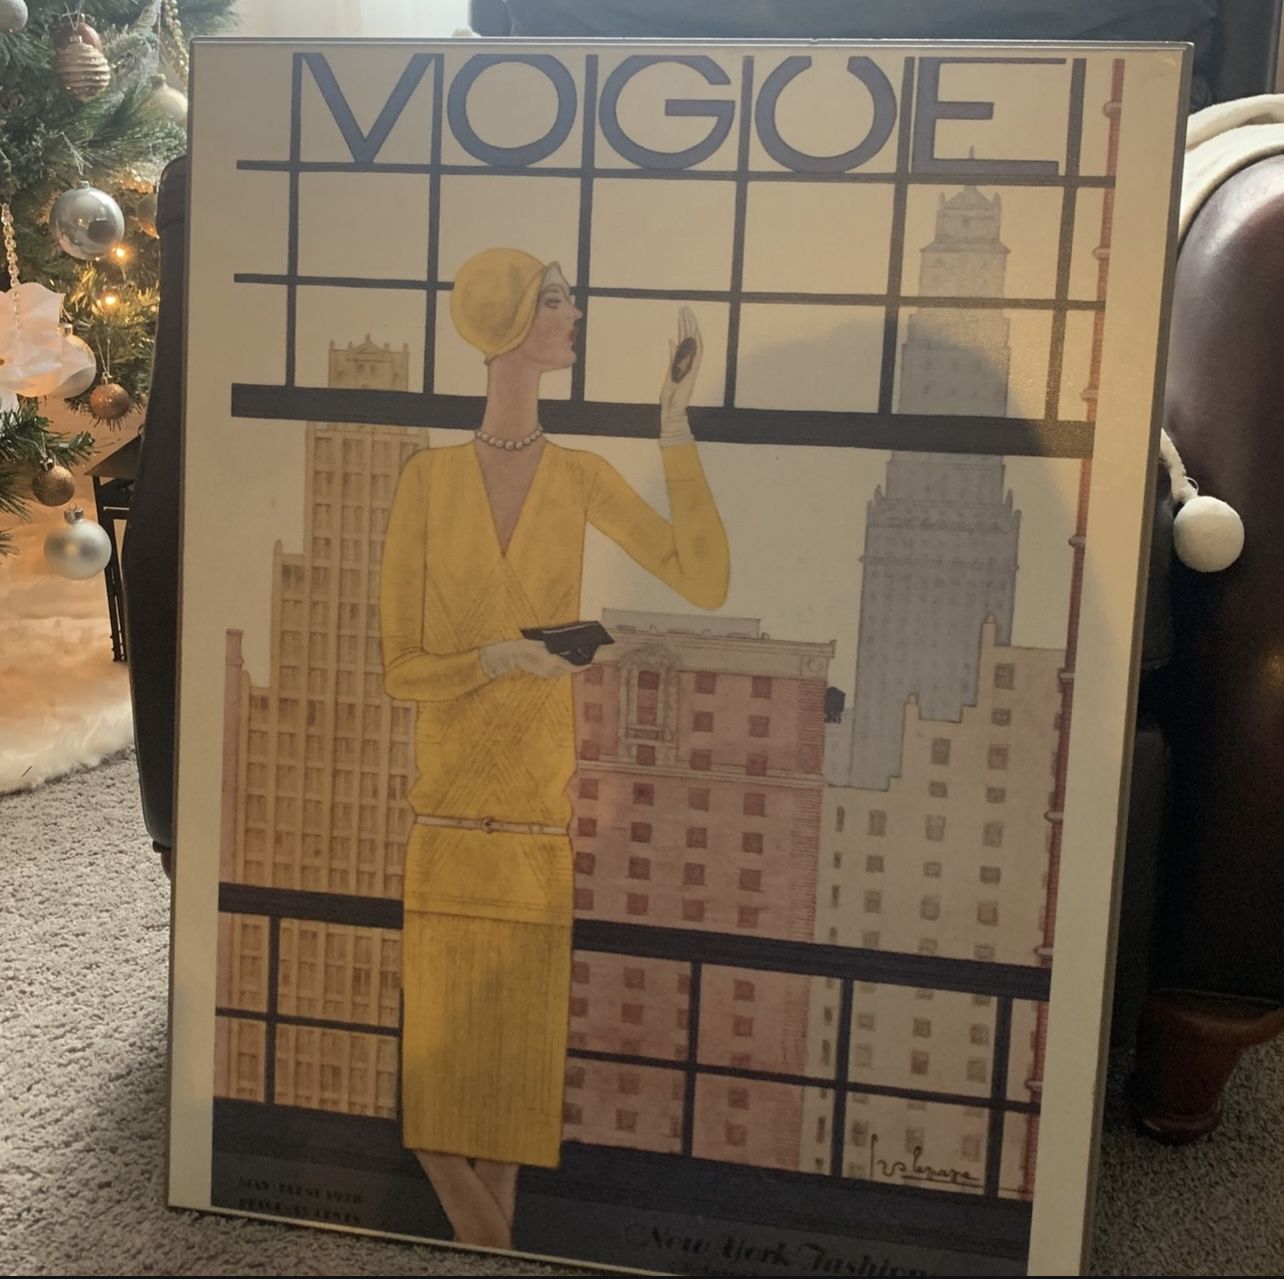 Vogue Picture Art Wall Hanging Decor New York City Wooden Plaque Retro